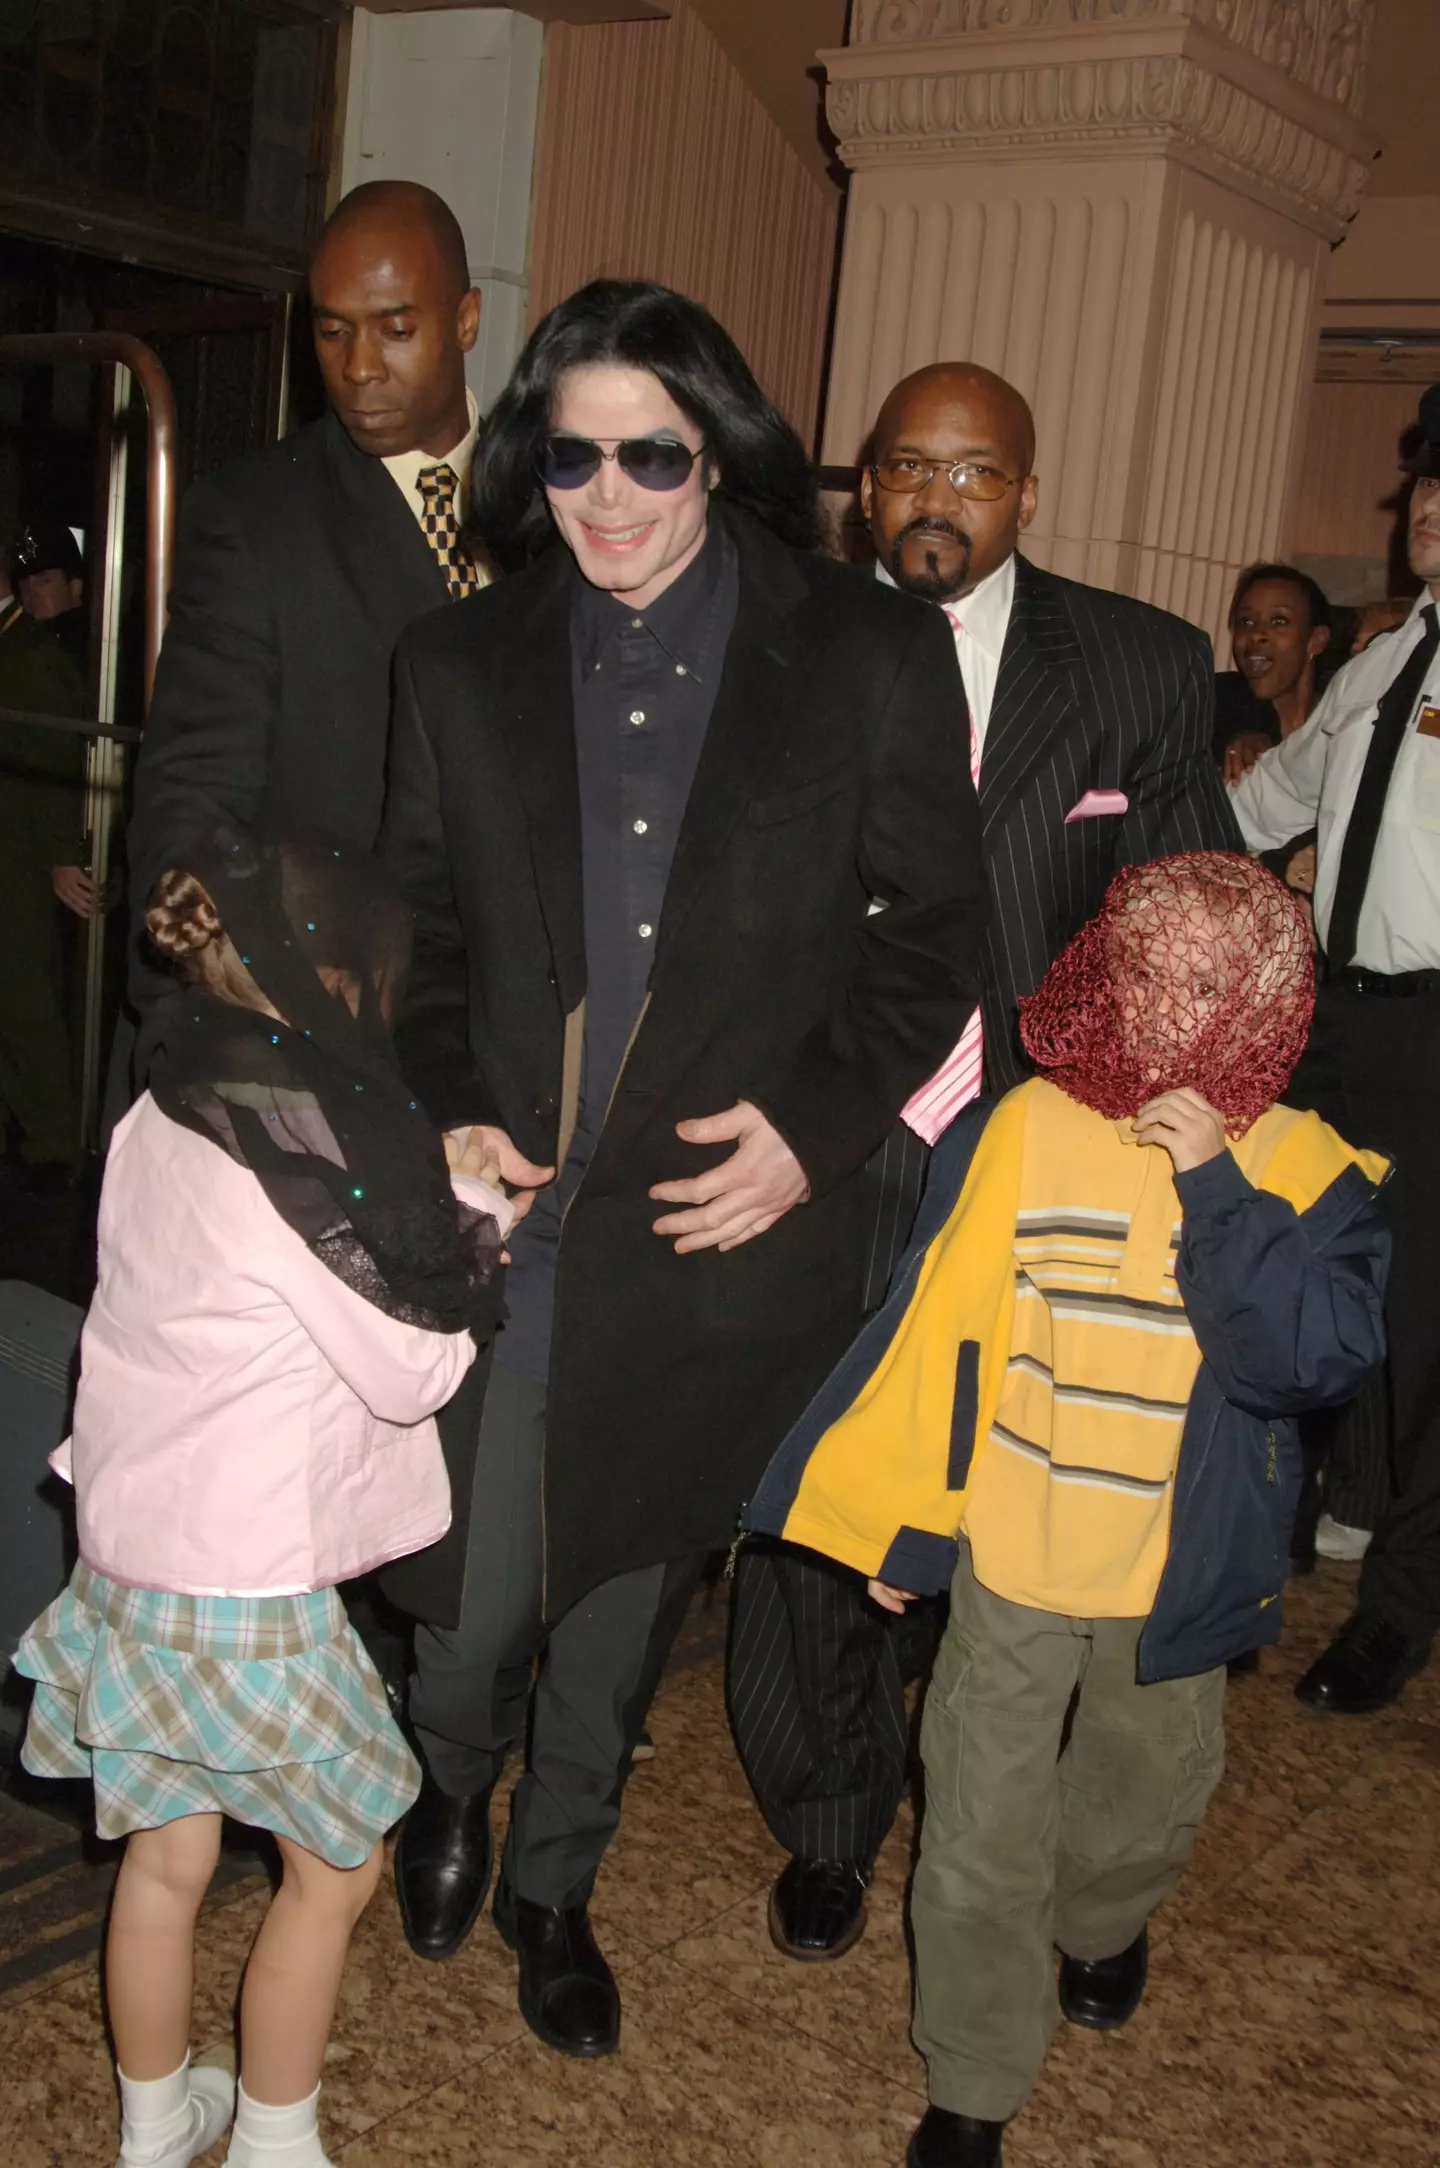 Michael Jackson pictured with two of his children.